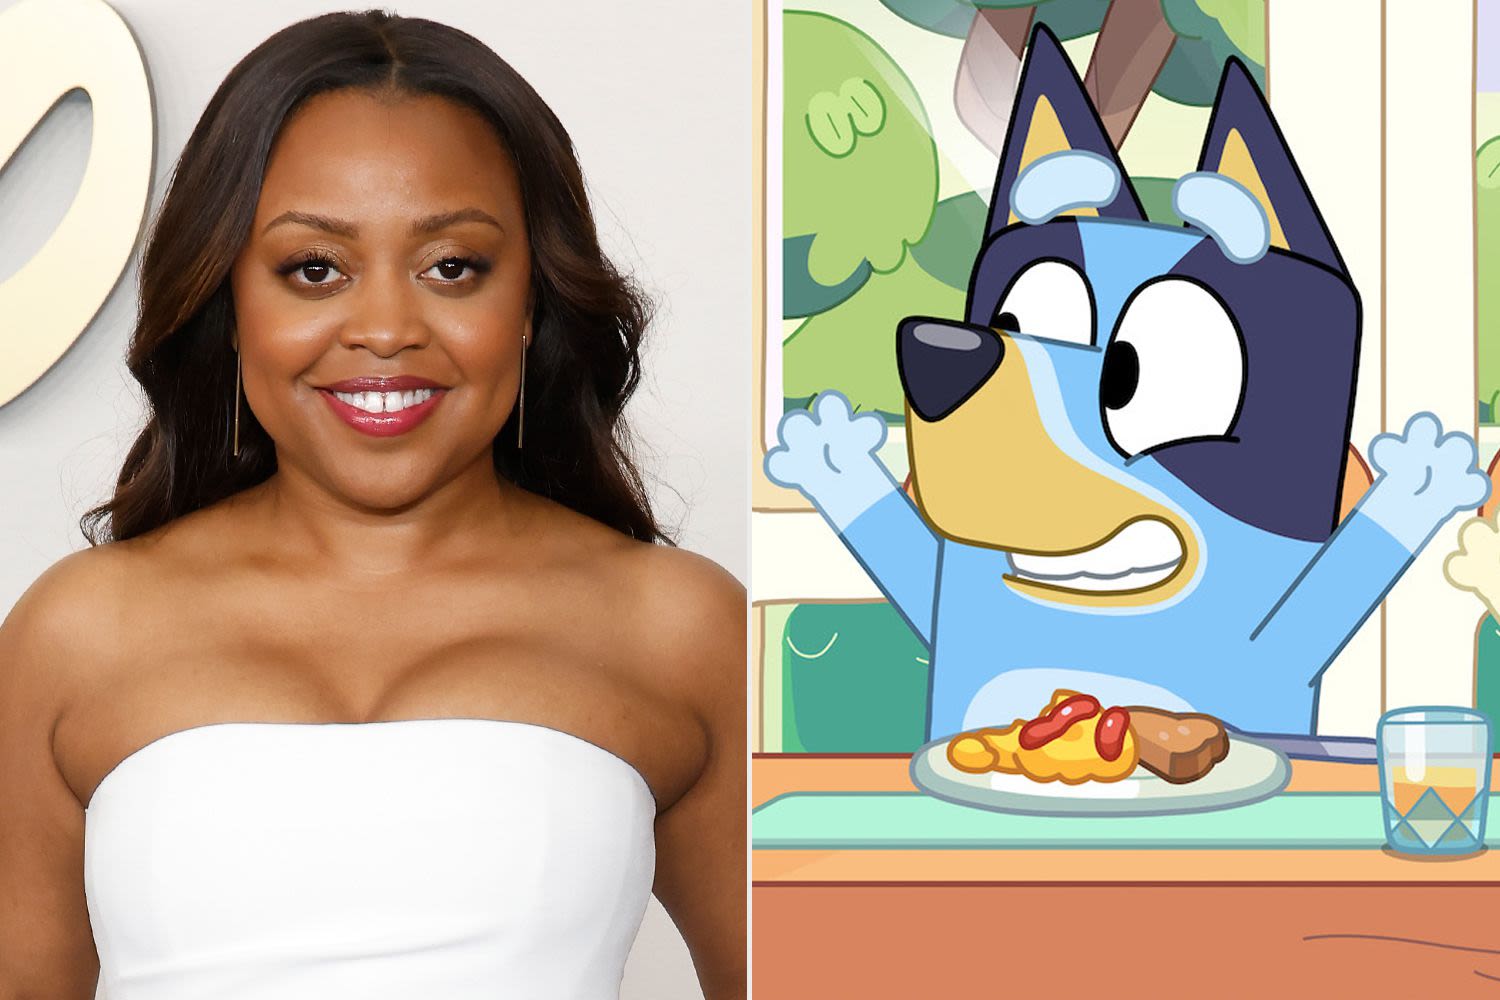 Why Quinta Brunson Wants to Make a Show Like 'Bluey': 'My Dream'